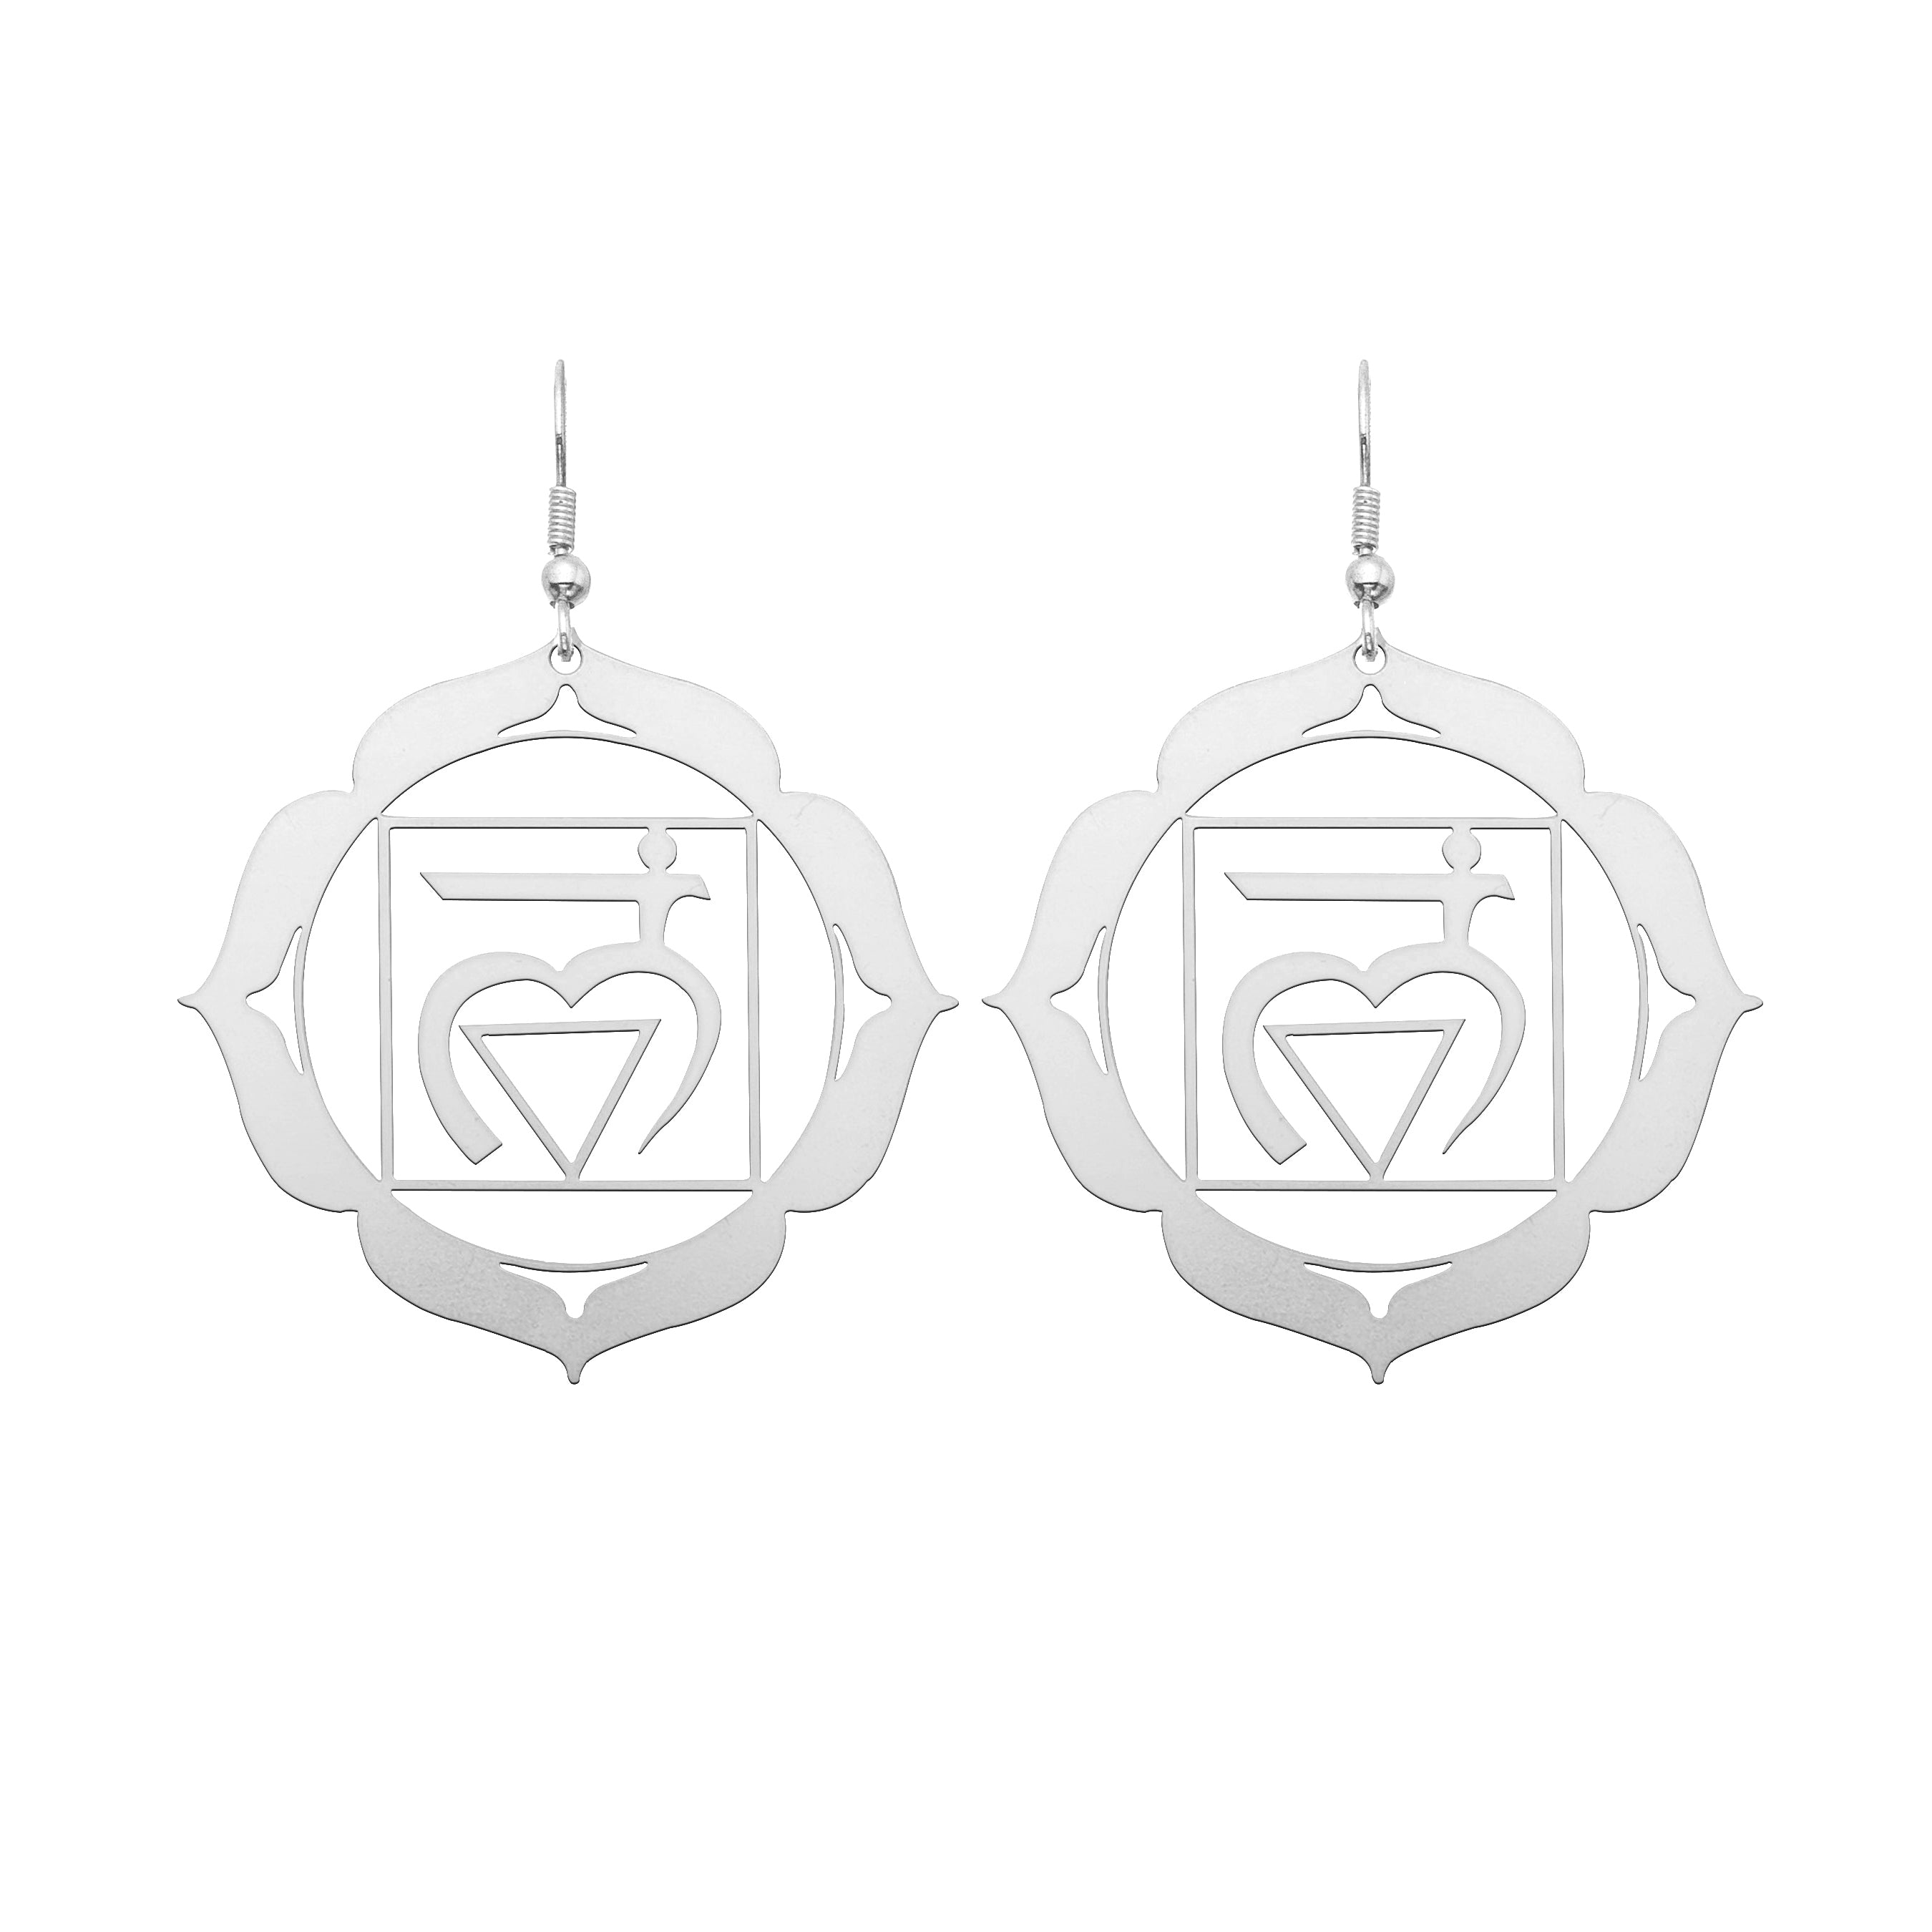 Root Chakra Earrings | The Root Chakra represents security